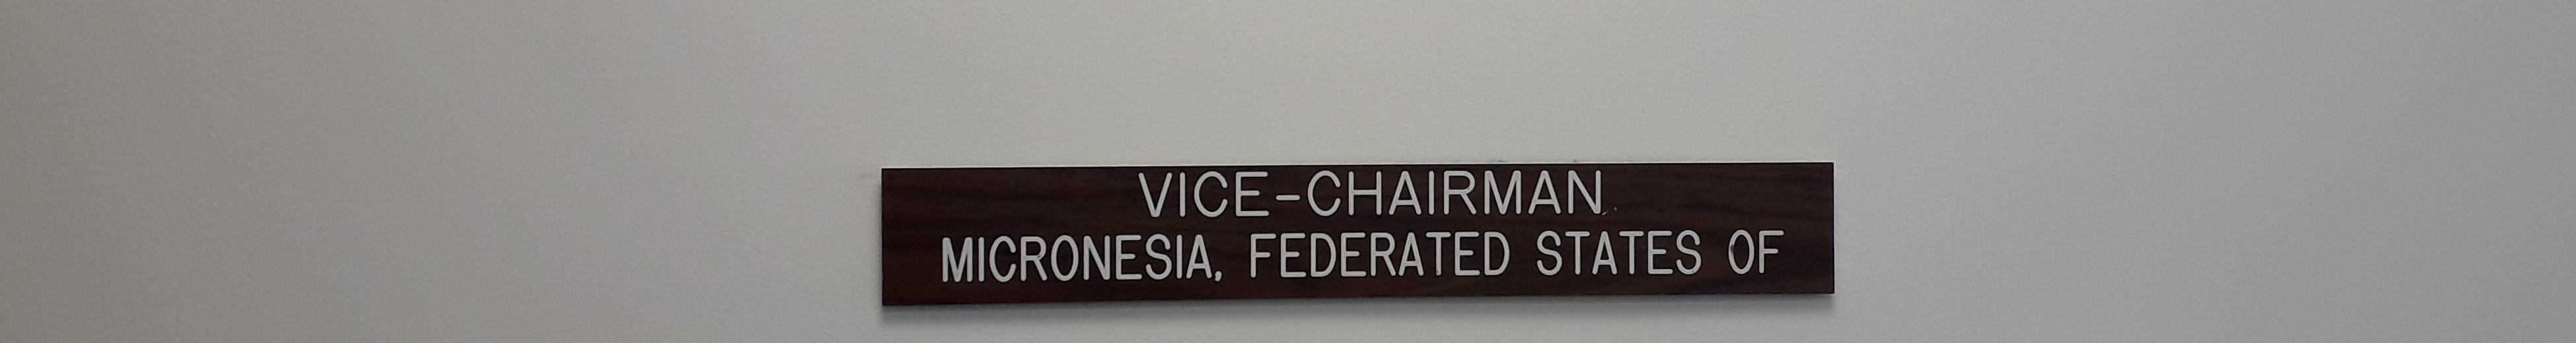 Permanent Mission of the Federated States of Micronesia